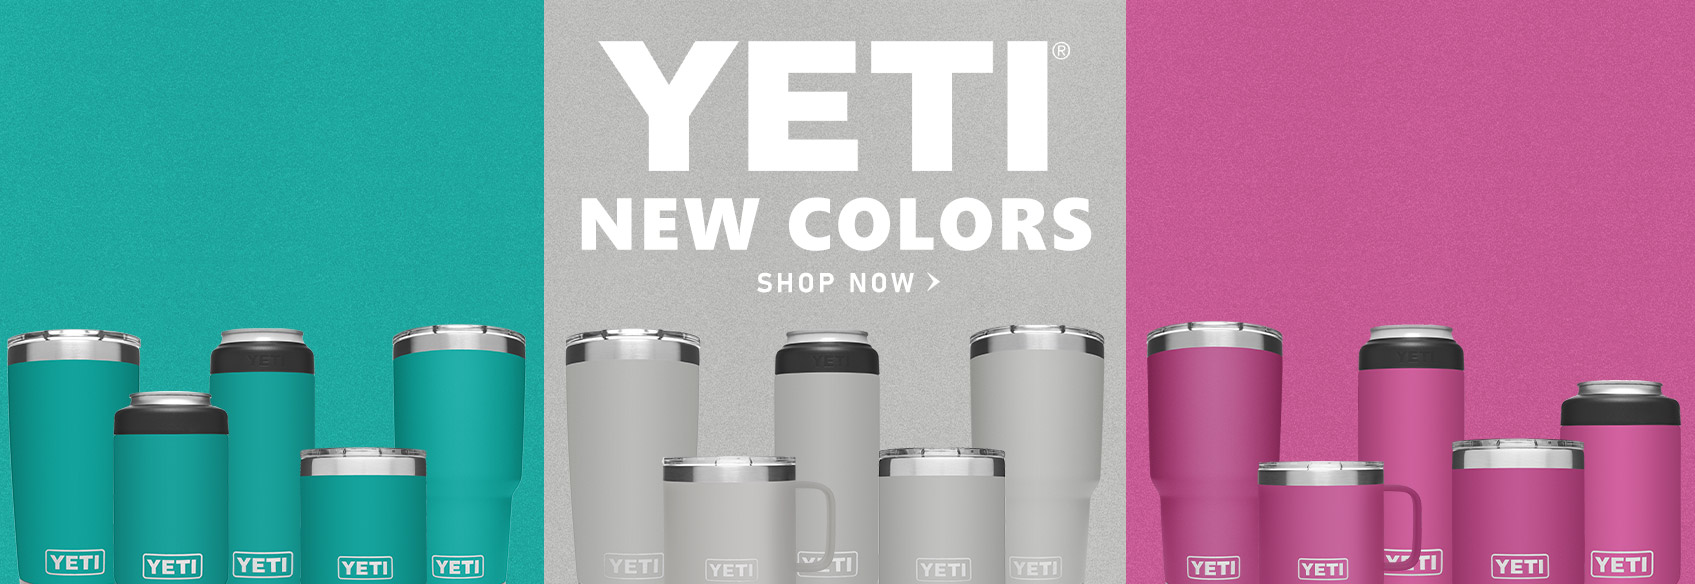 YETI Coolers & Gear Dungarees